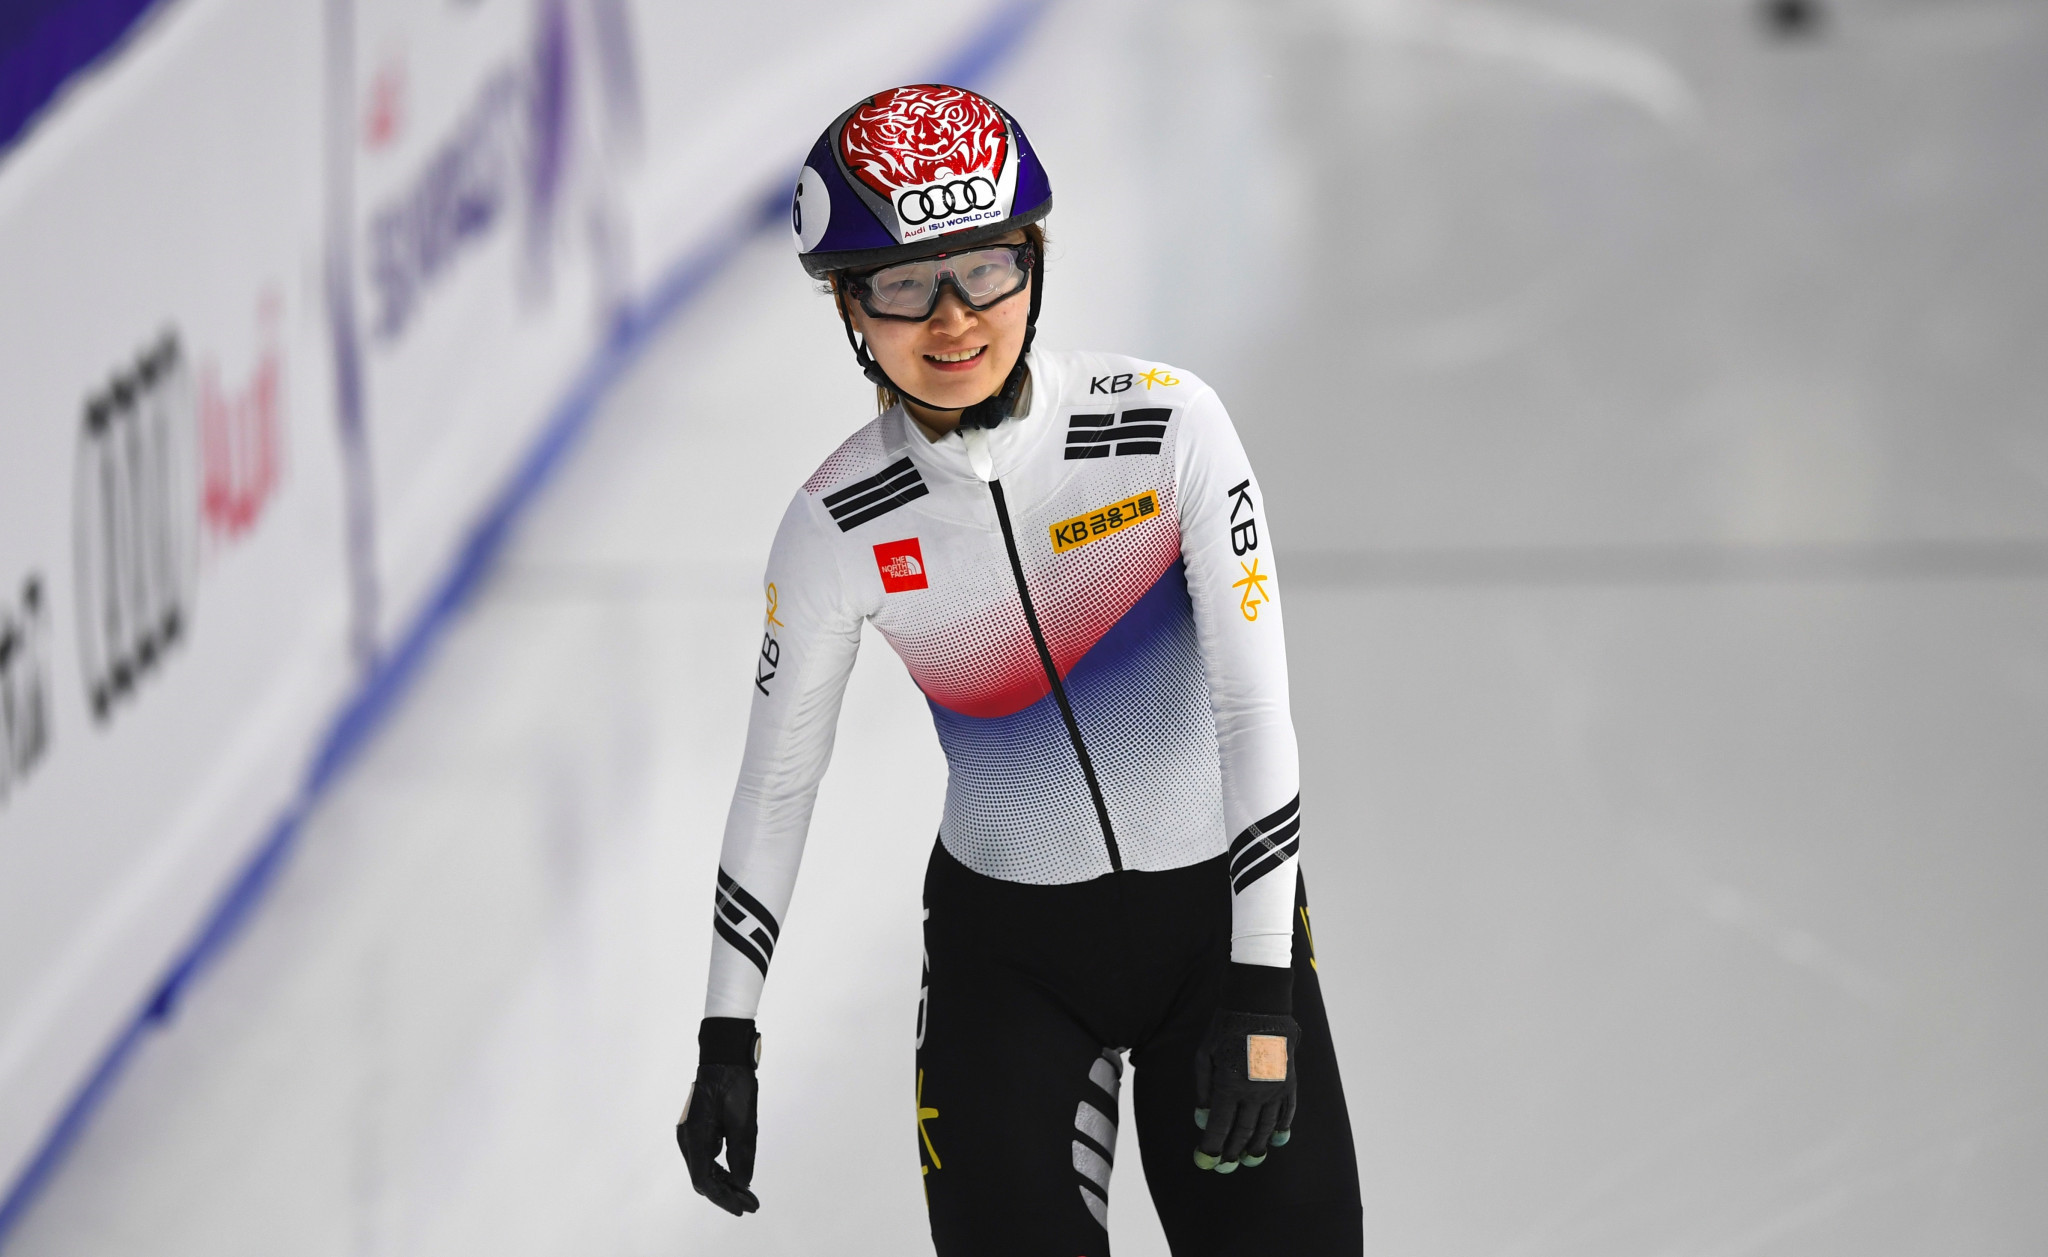 South Koreans lay down marker at Seoul ISU Short Track World Cup